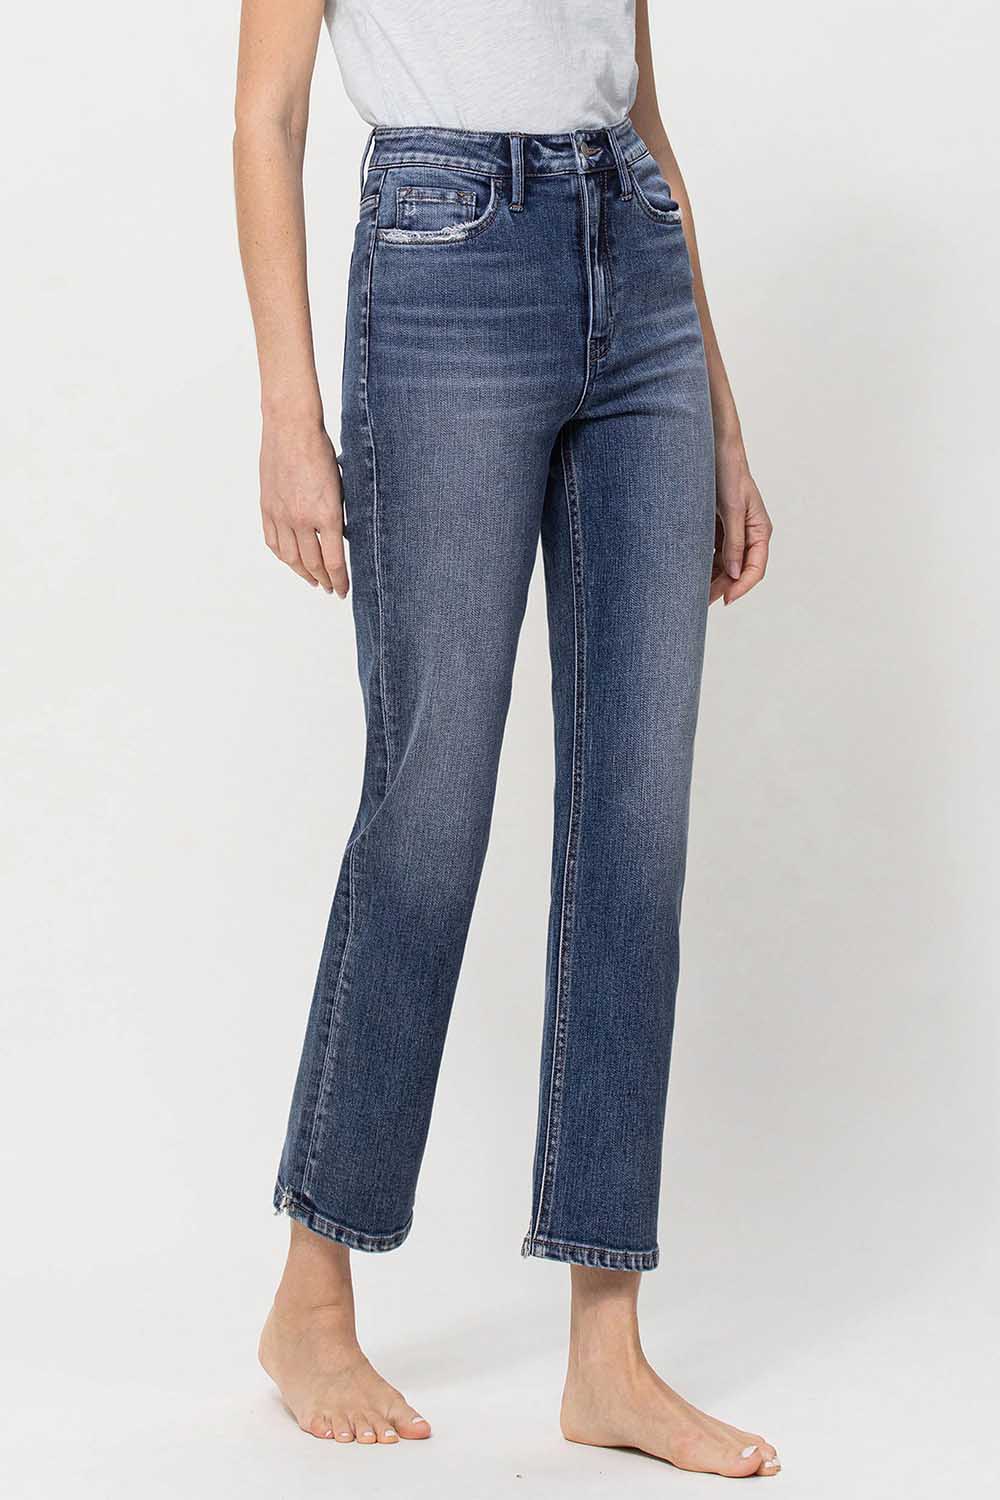 flying-monkey-jeans-high-rise-ankle-straight-jeans-05